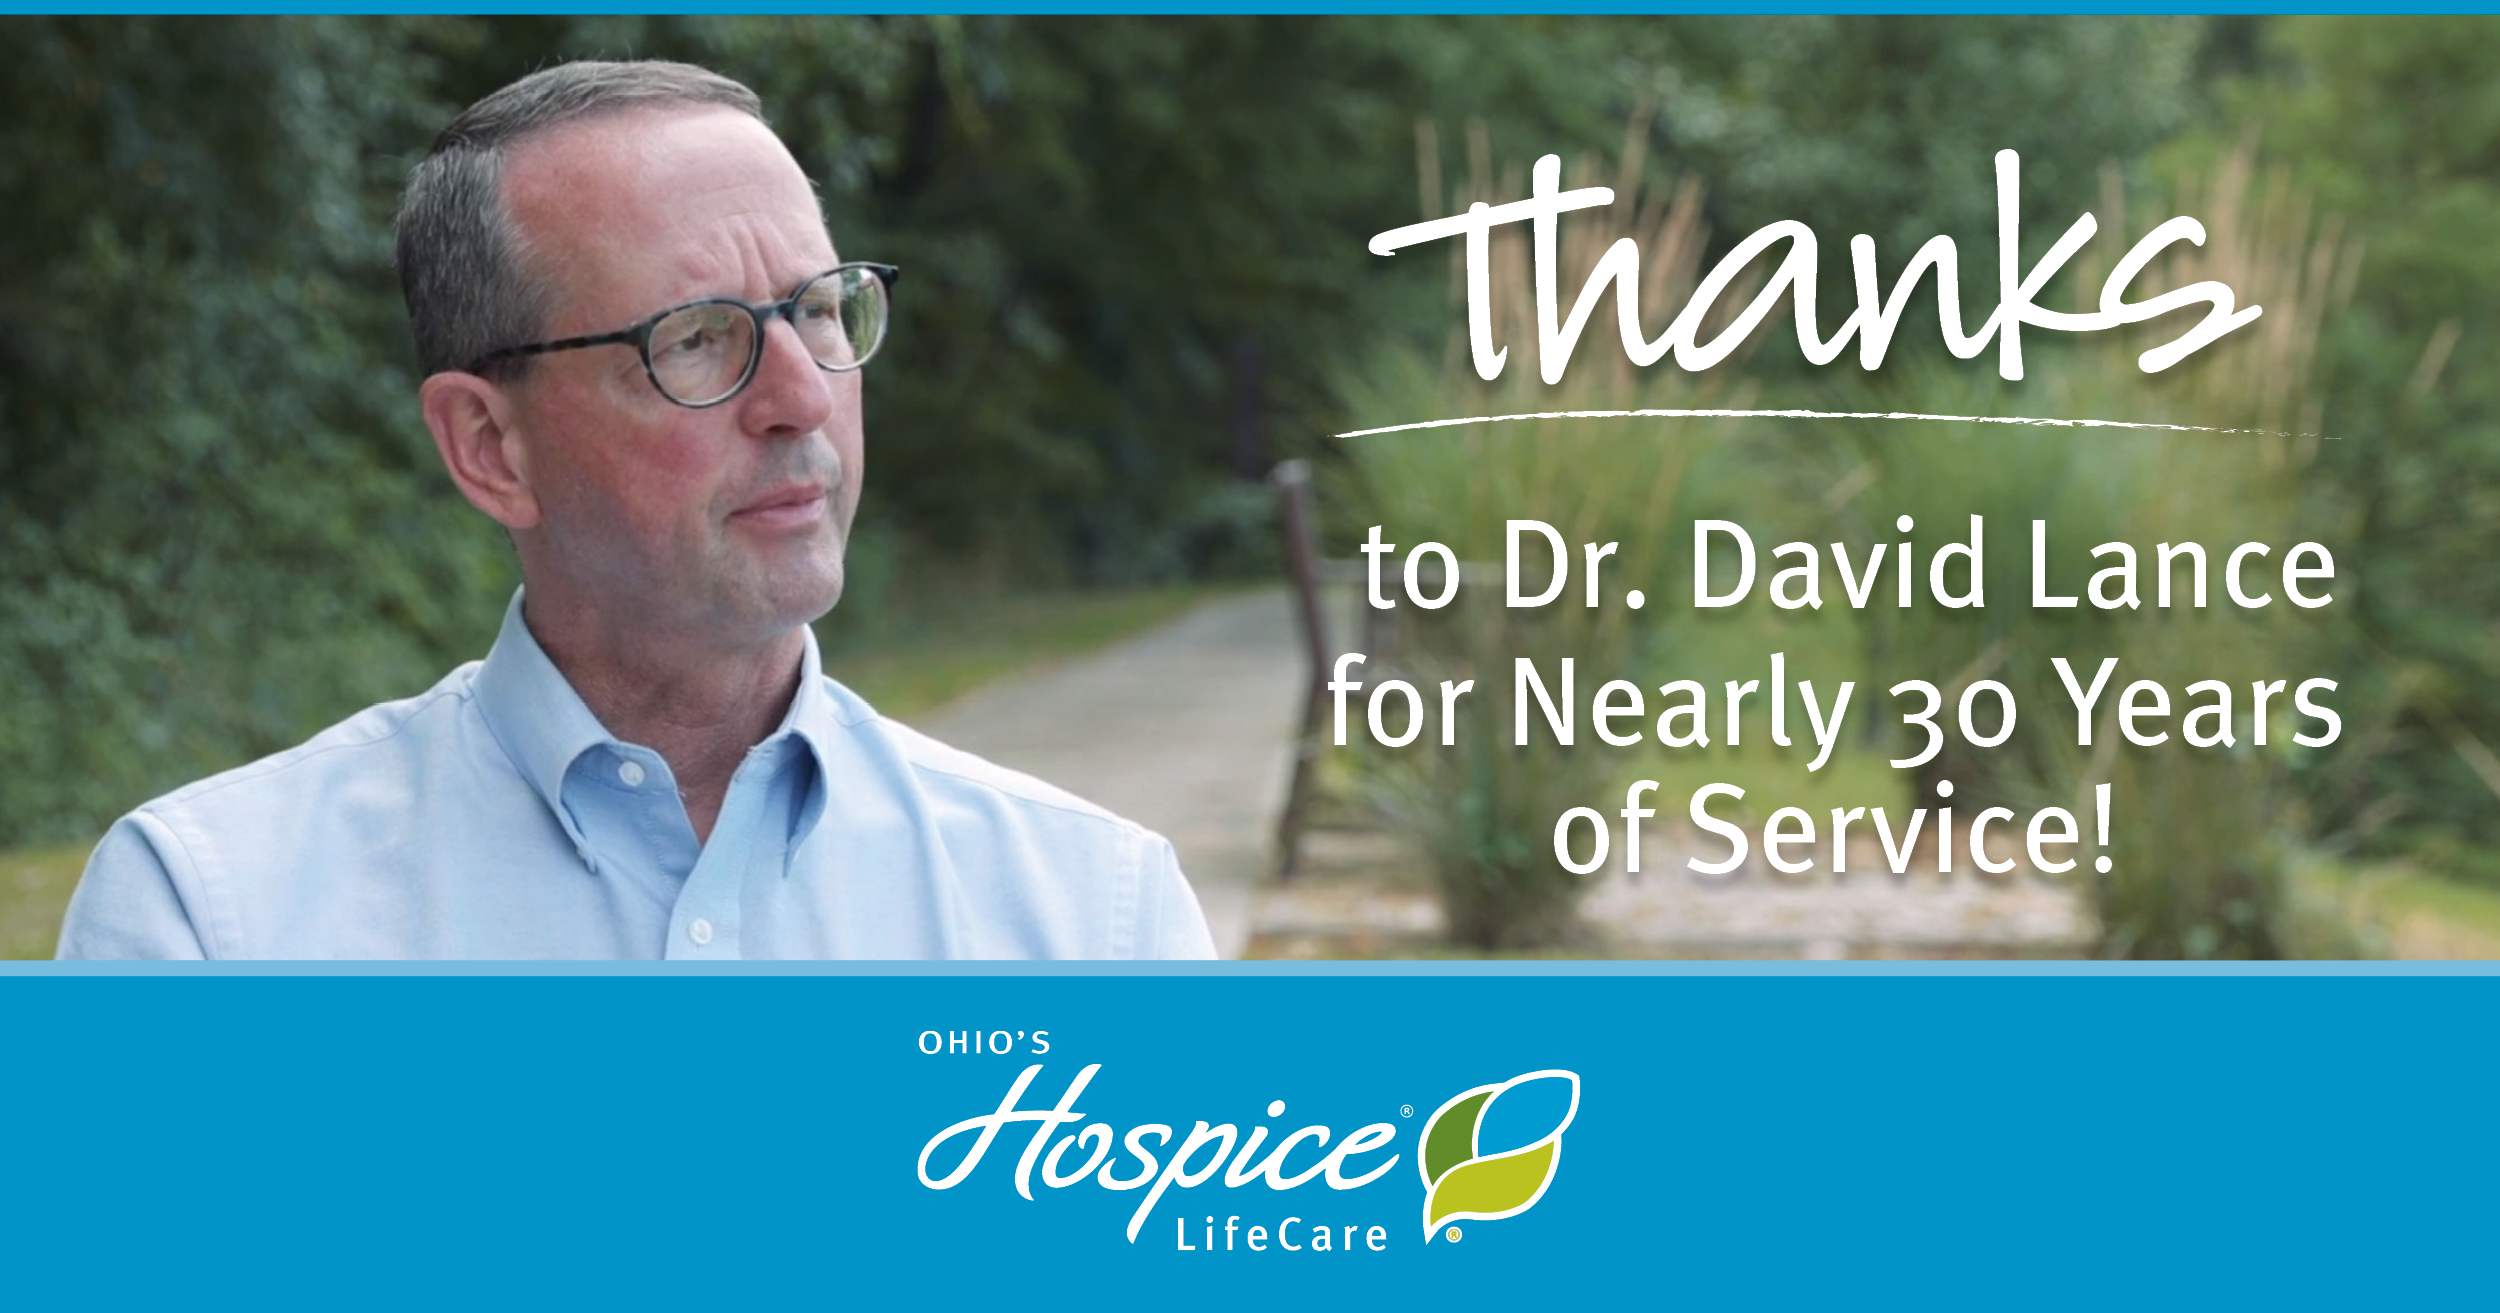 Thanks to Dr. David Lance for Nearly 30 Years of Service!